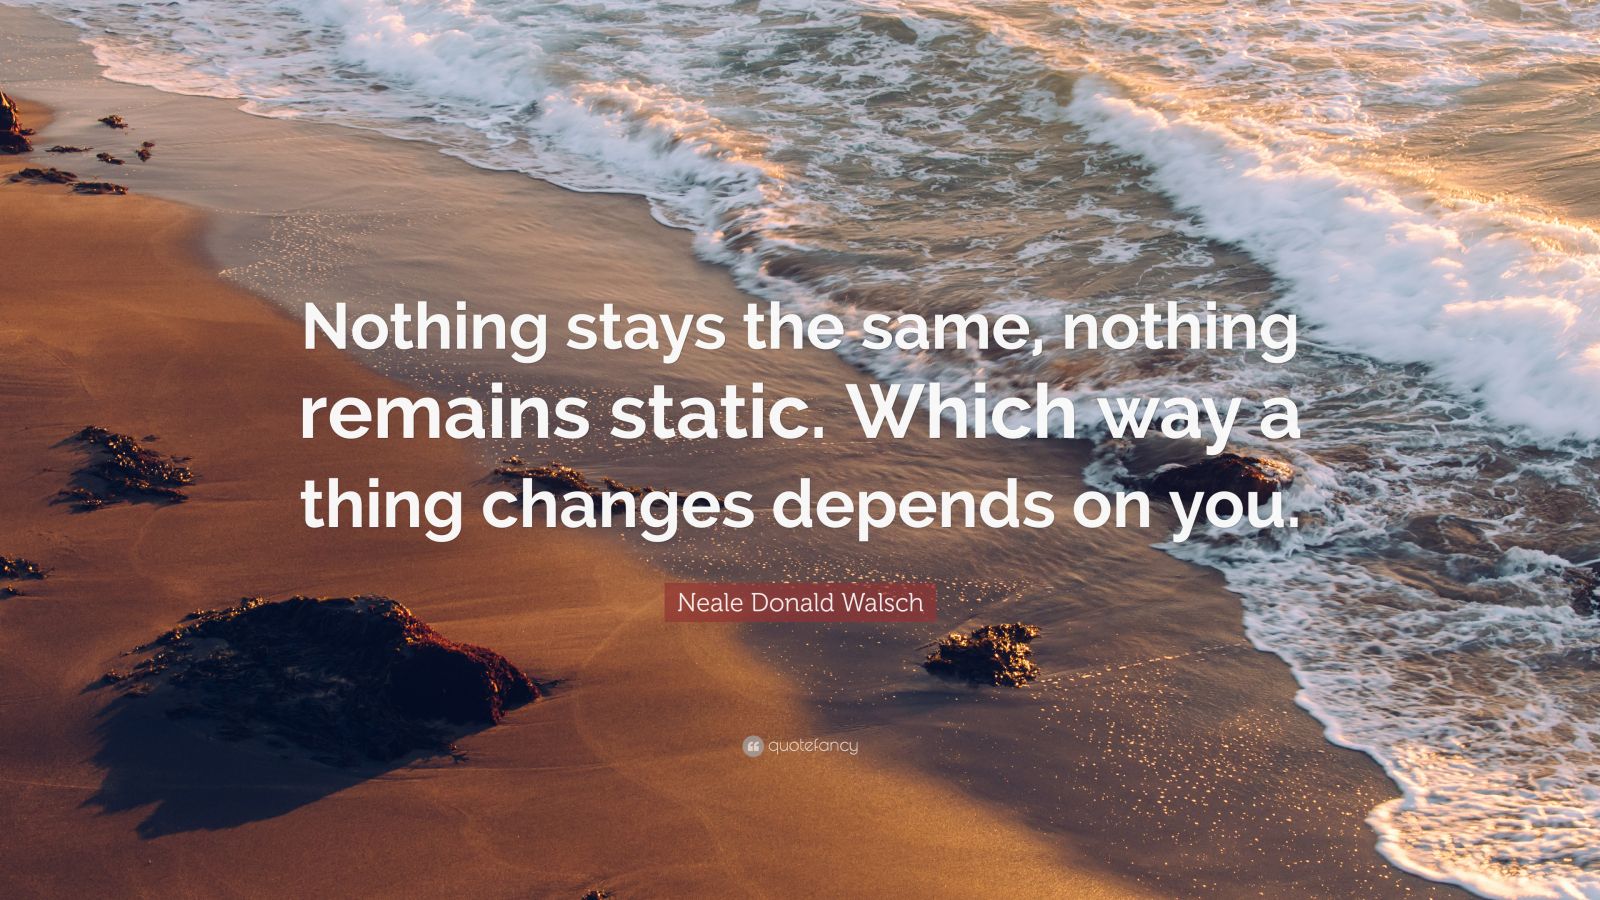 Neale Donald Walsch Quote: “Nothing stays the same, nothing remains